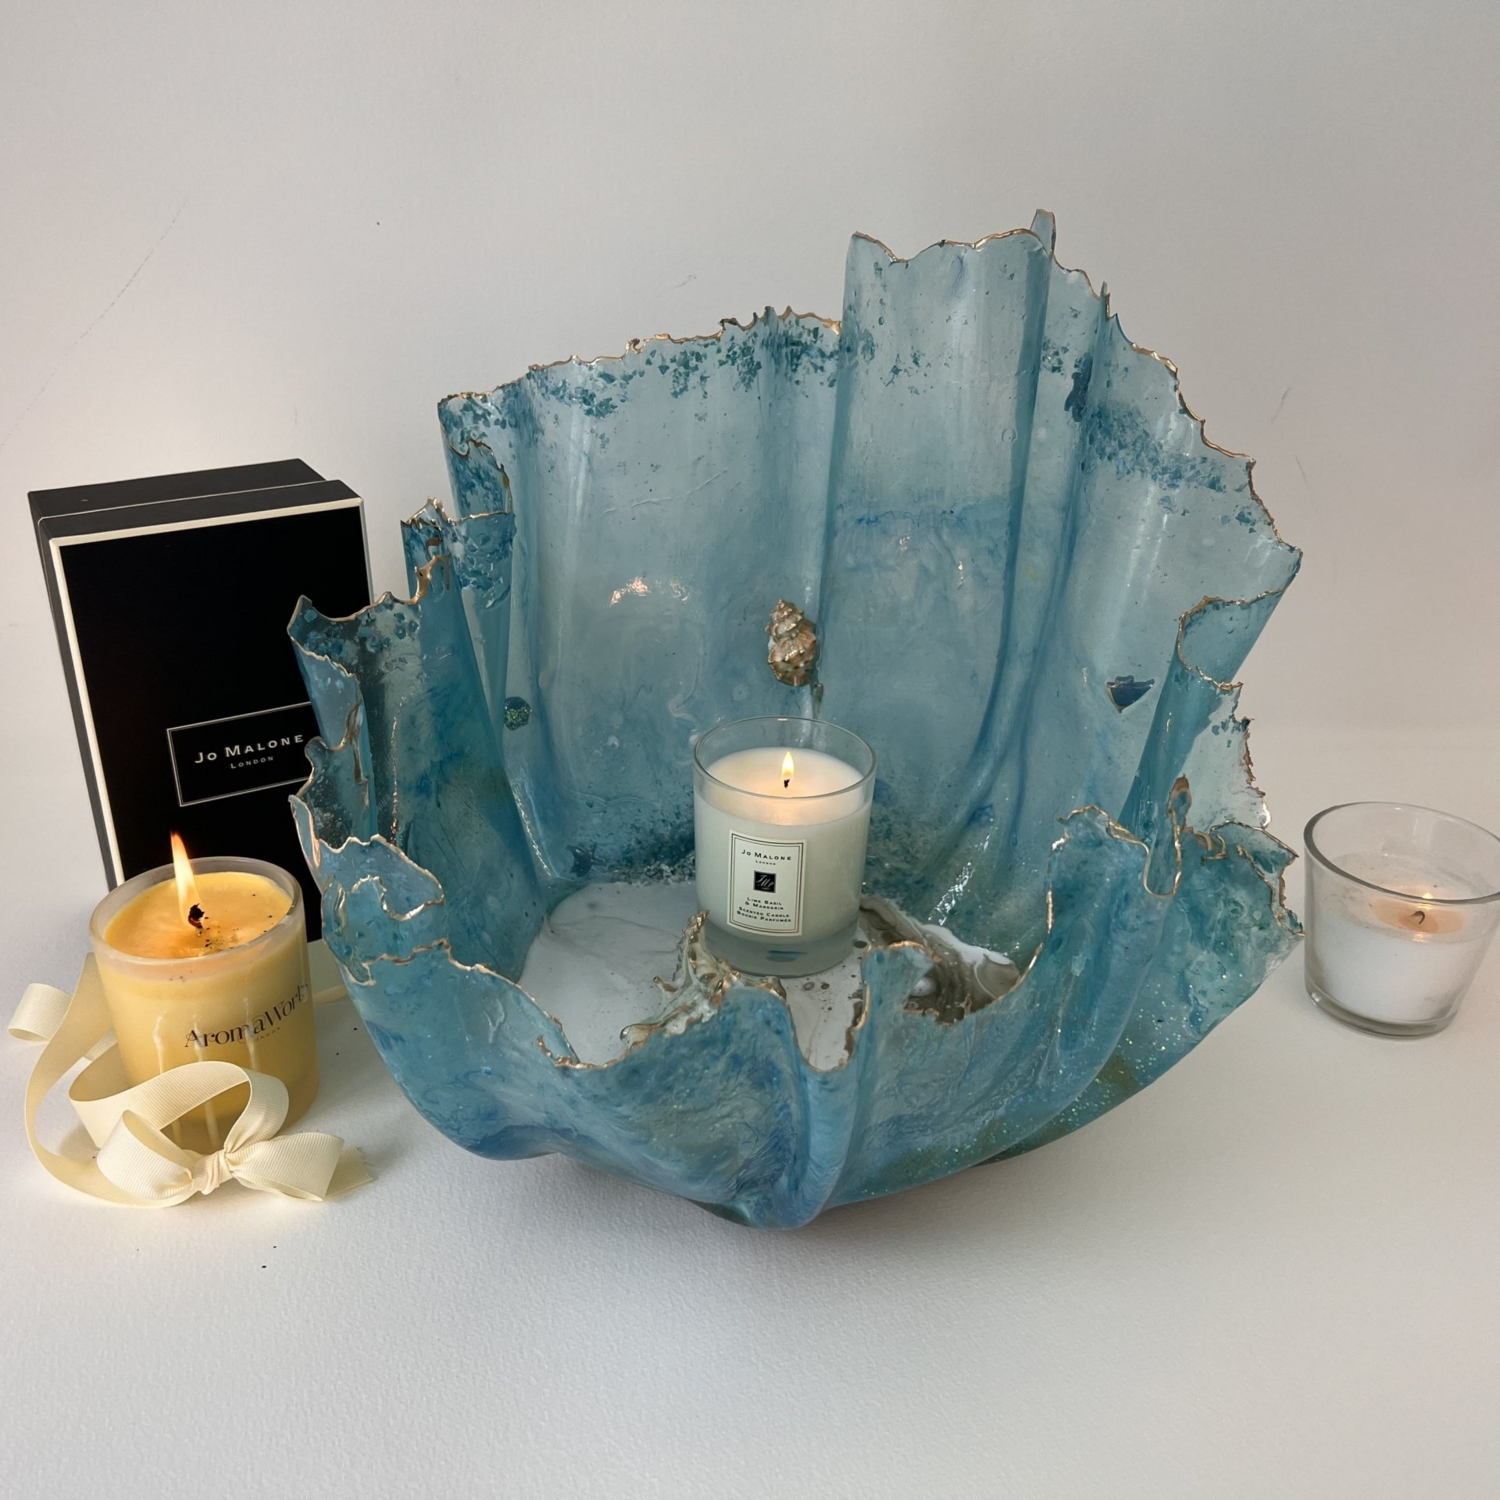 Large stunning sculptured resin handmade transparent blue "fish bowl" with real indian shells and sand with gold floating metallic candle or fruit holder centrepiece